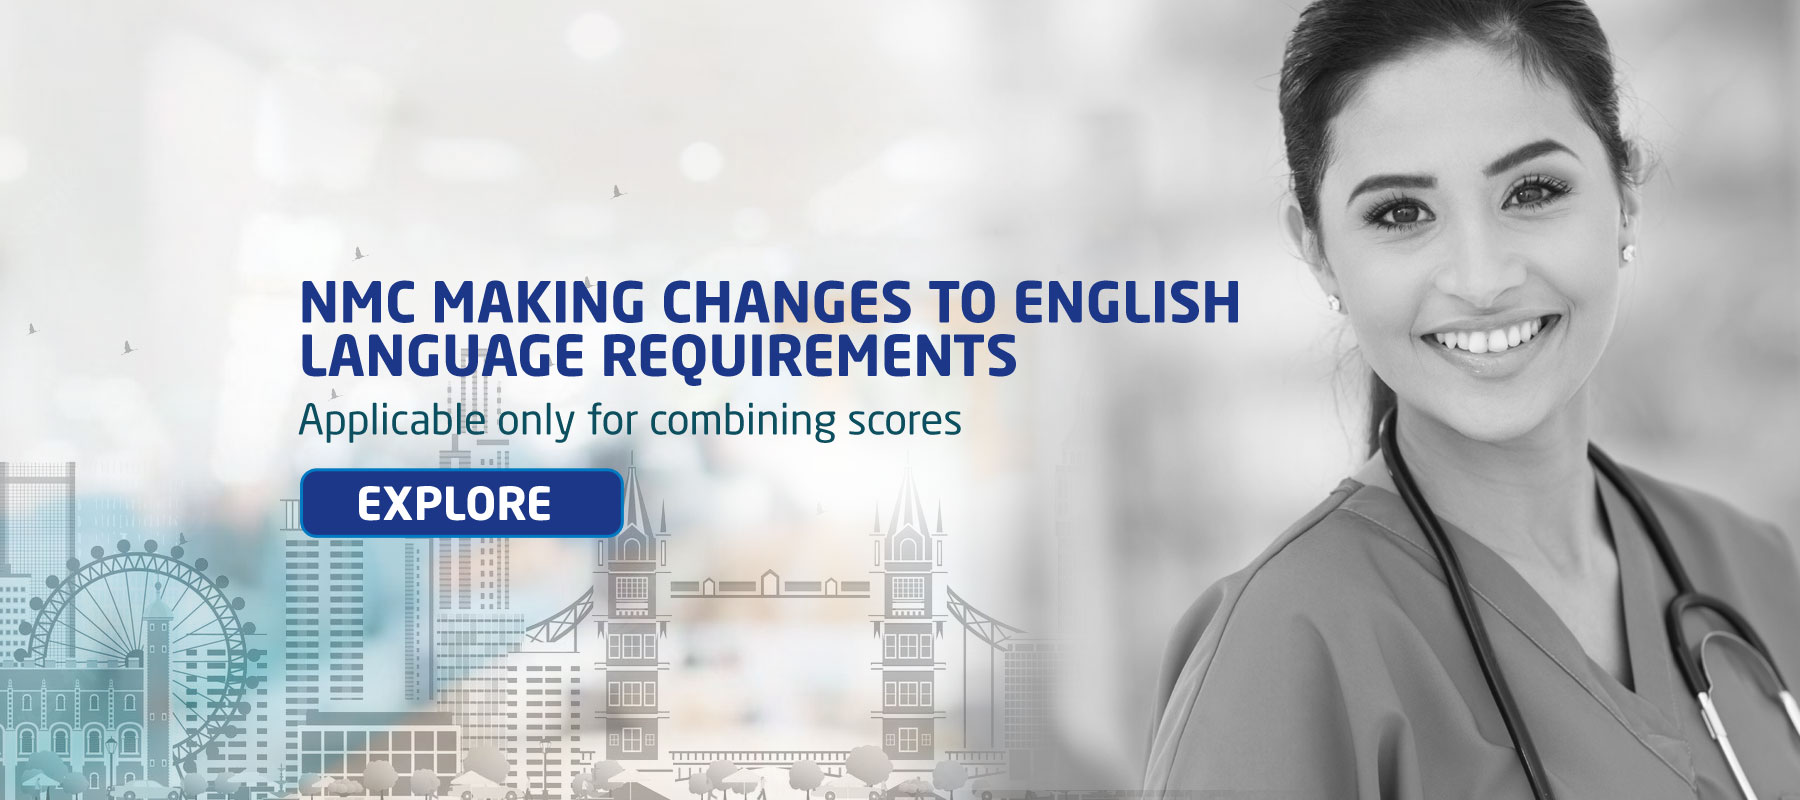 We’re making changes to our English language requirements